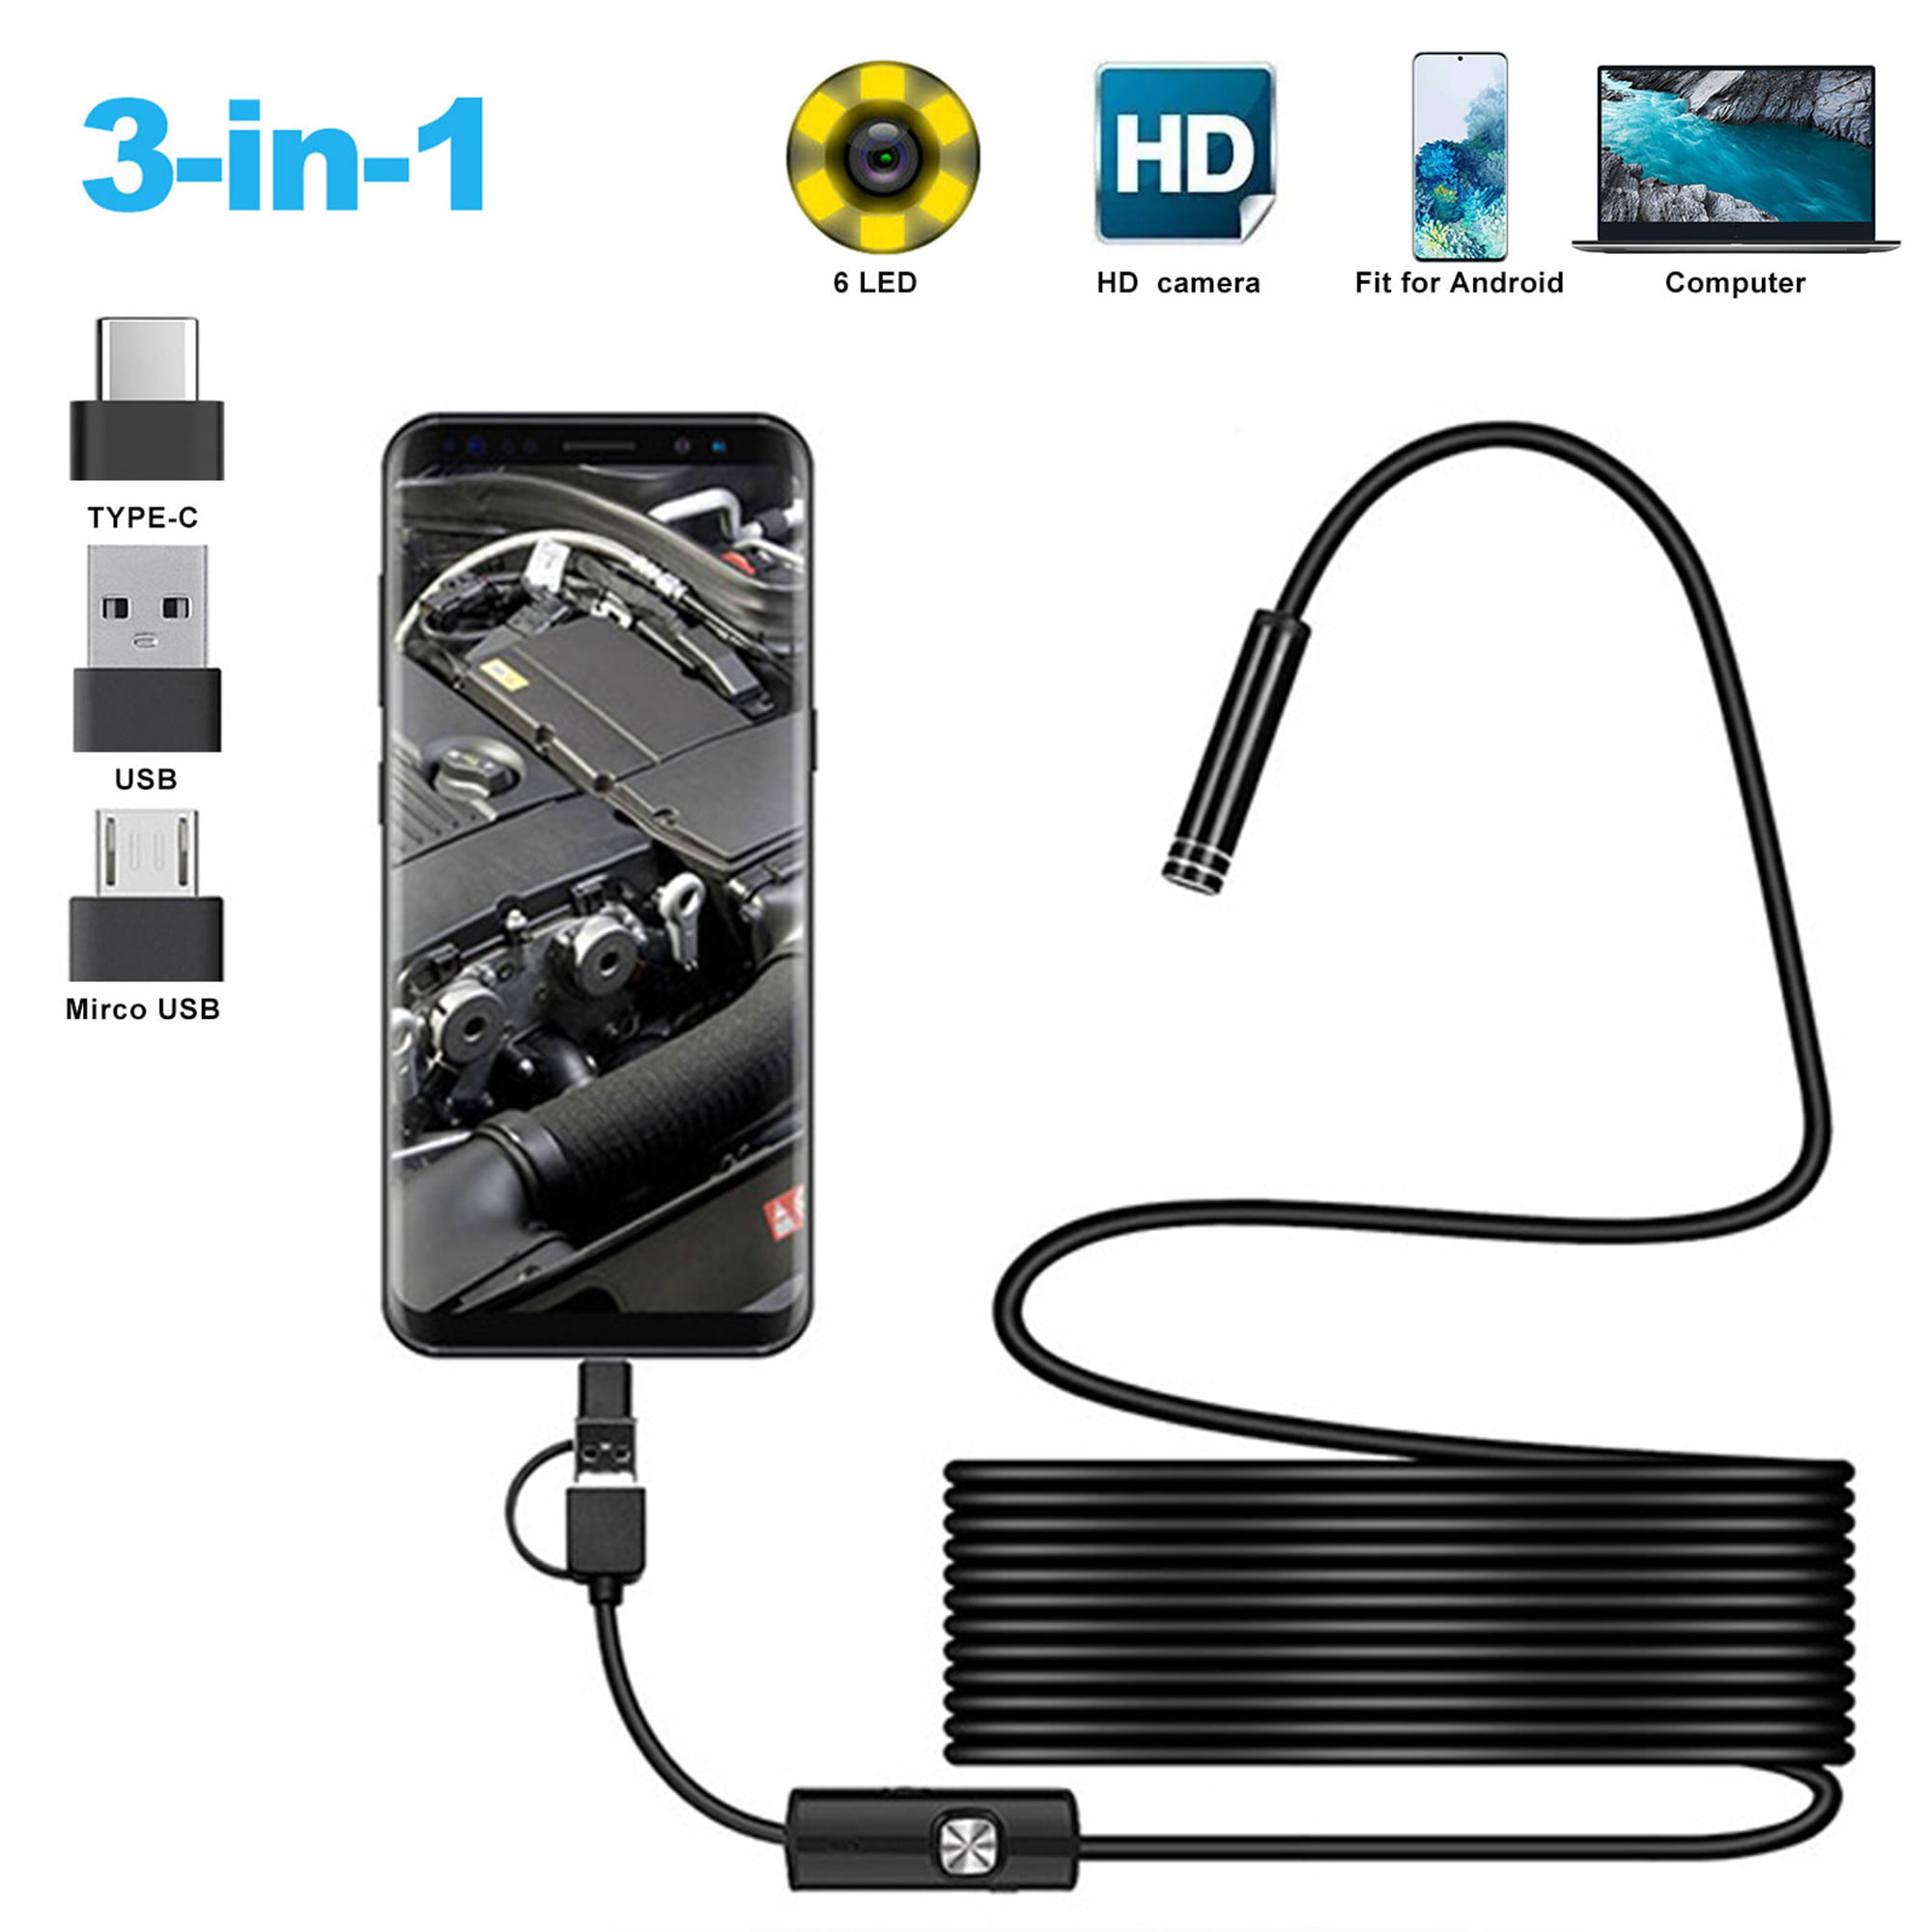 Waterproof USB Endoscope Borescope Inspection Camera For Android Phone Windows 